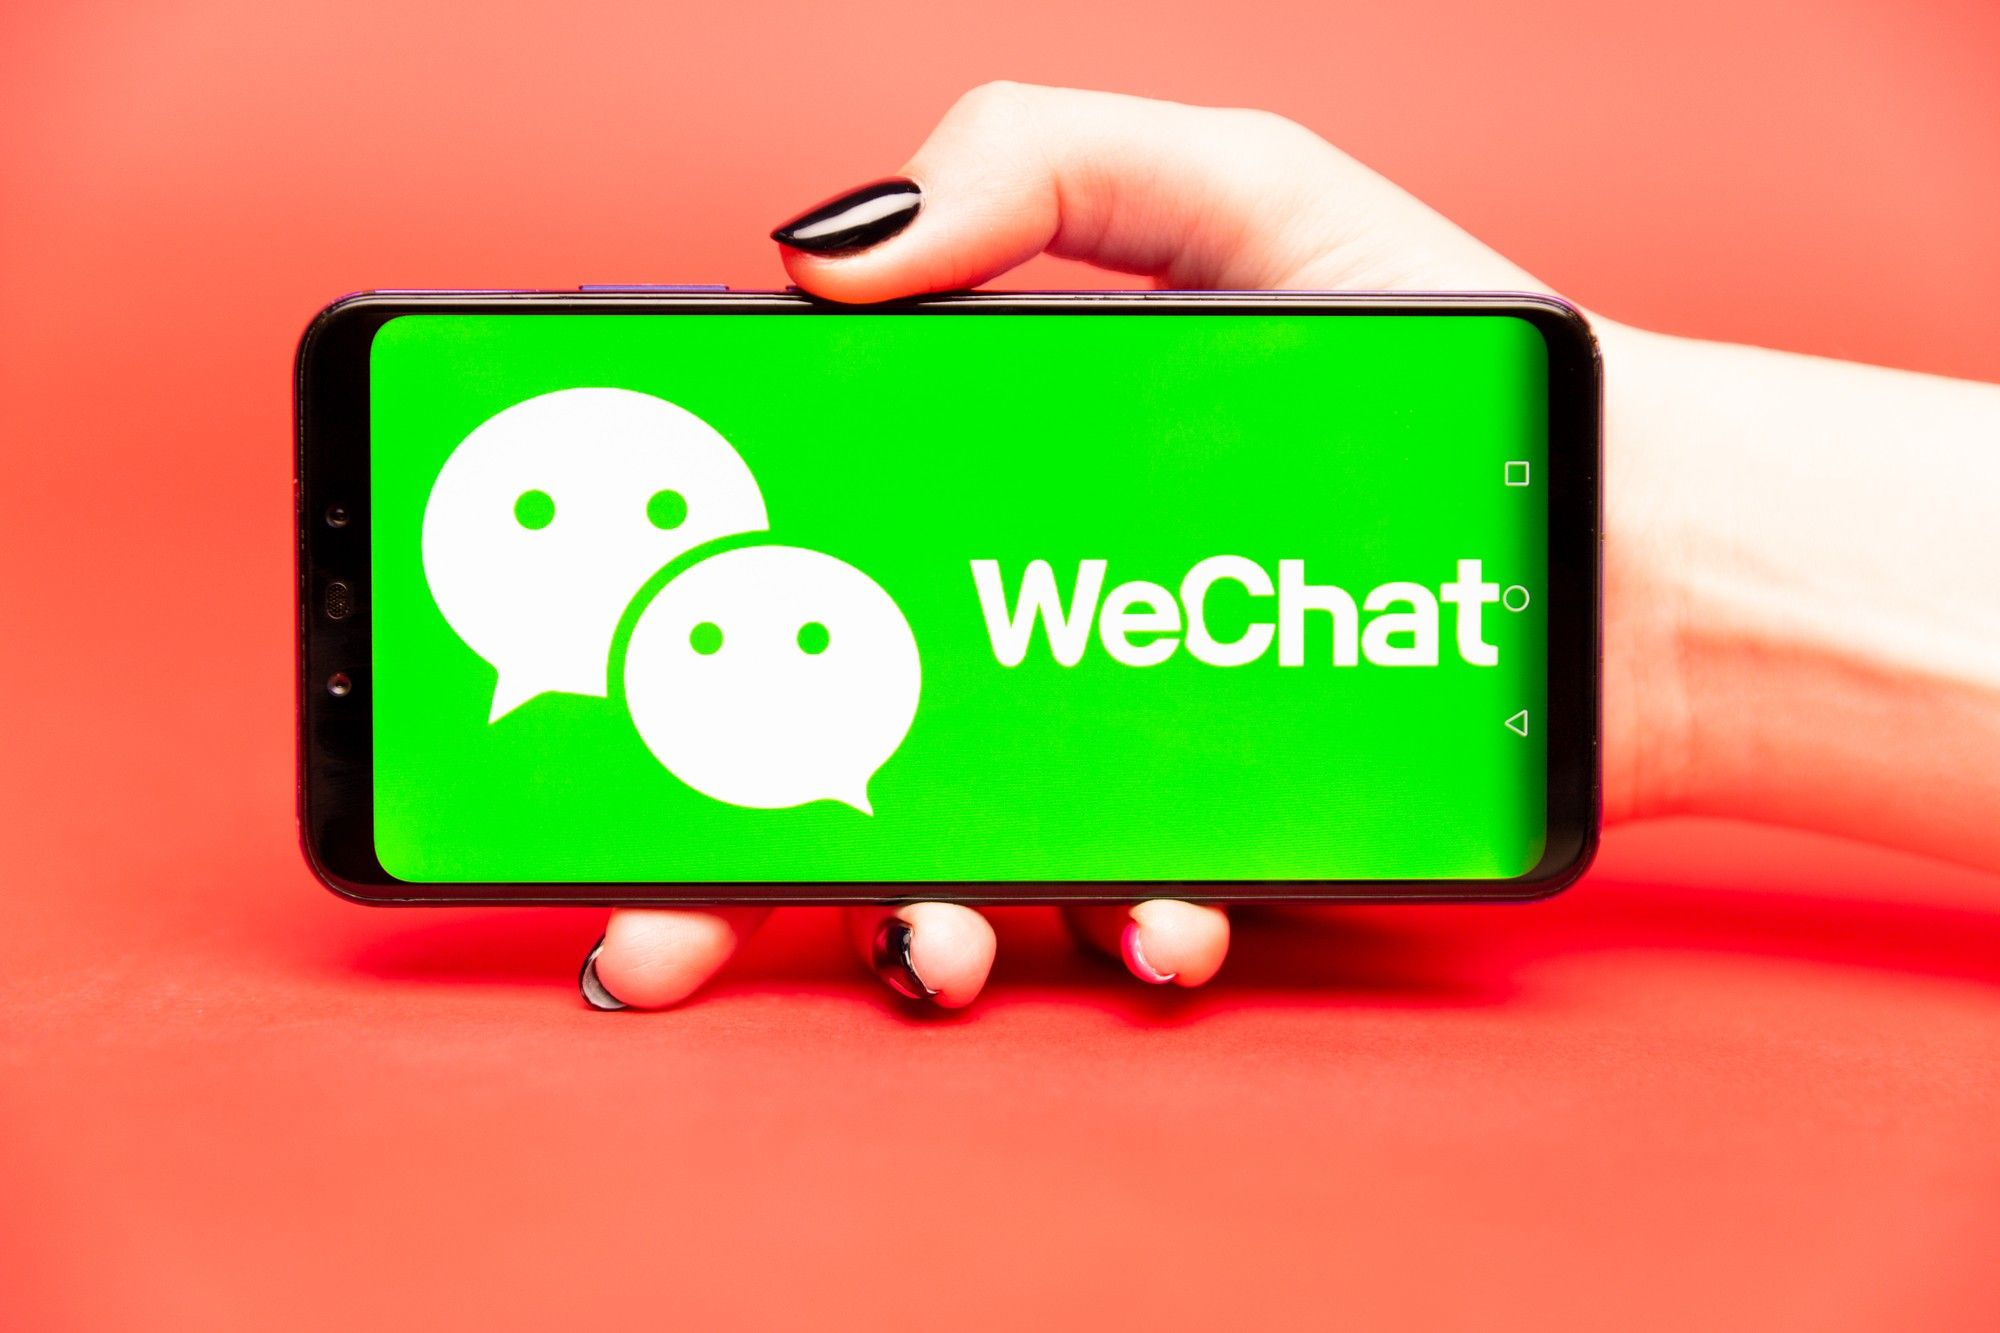 The injunction stopping the proposed WeChat ban is still in place.